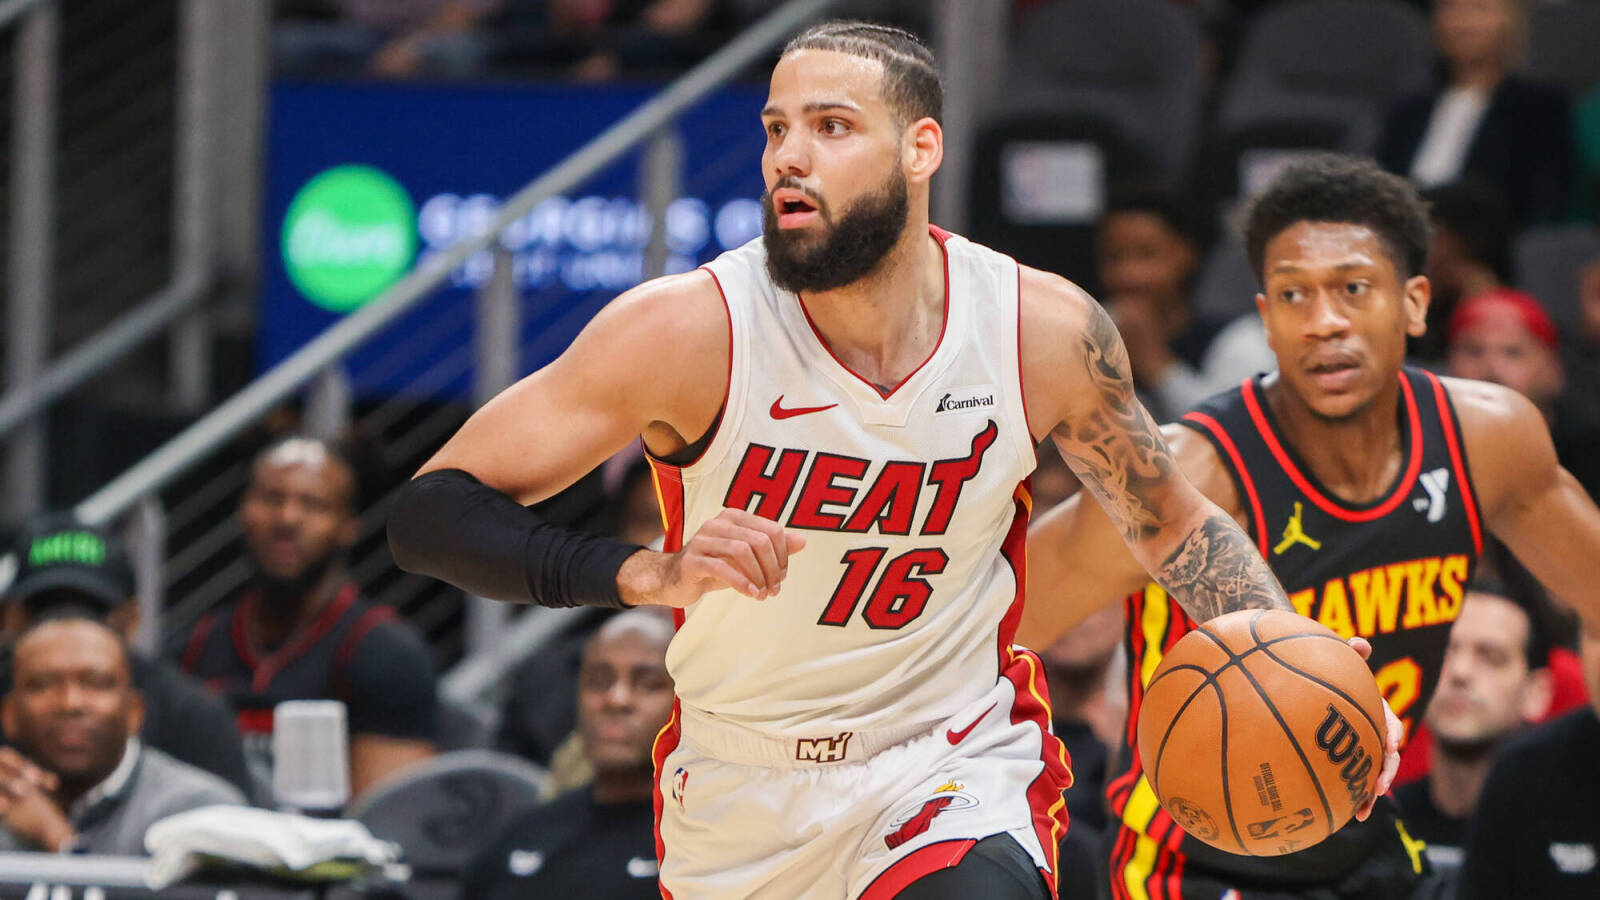 Heat could lose key rotation player due to salary constraints